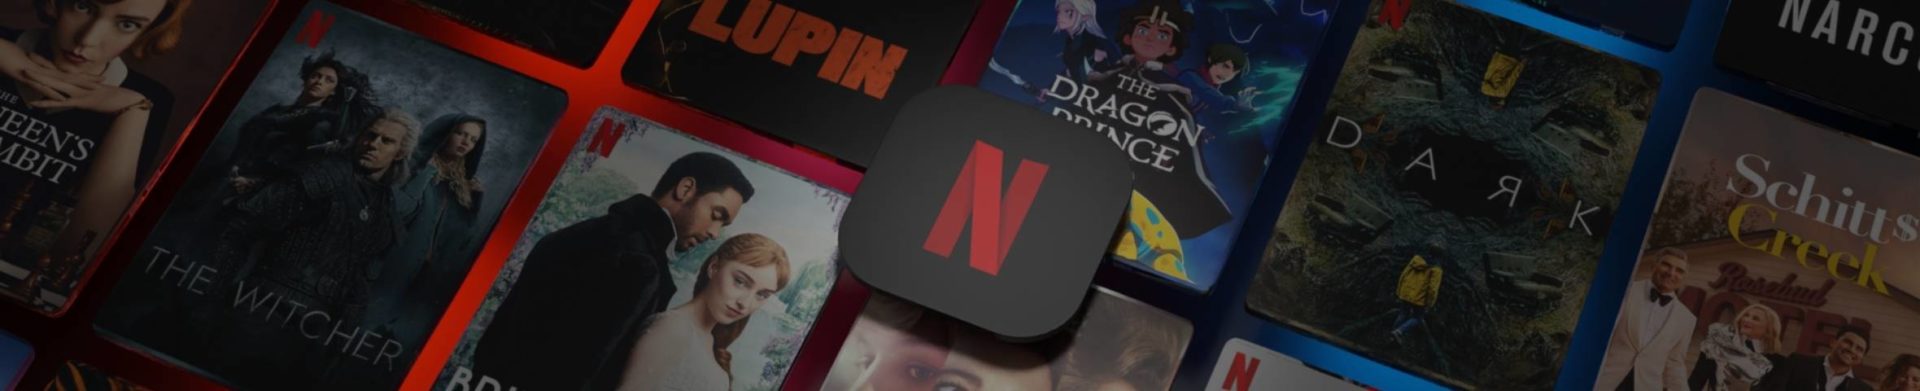 Netflix streaming services